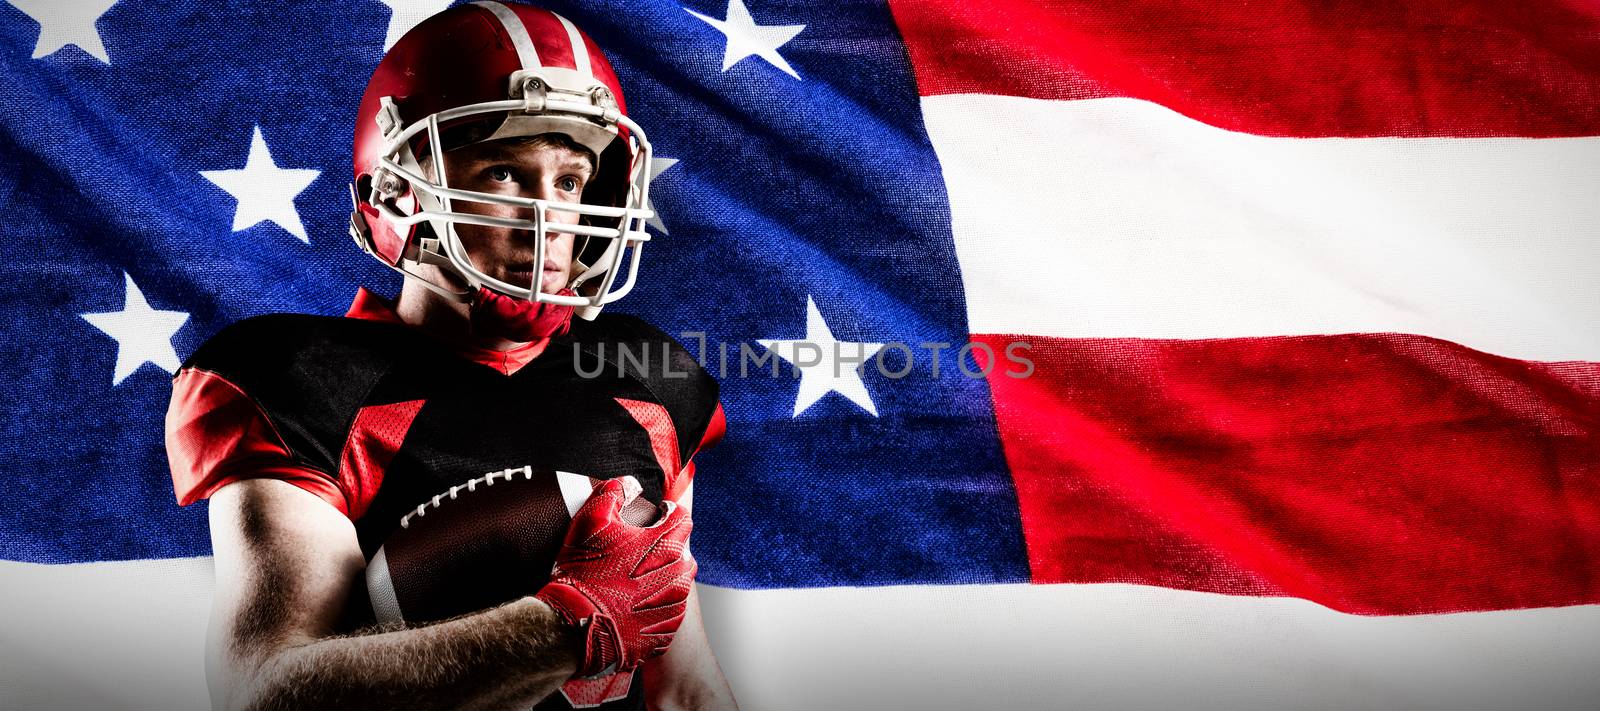 American football player in helmet standing with rugby ball against close-up of an american flag